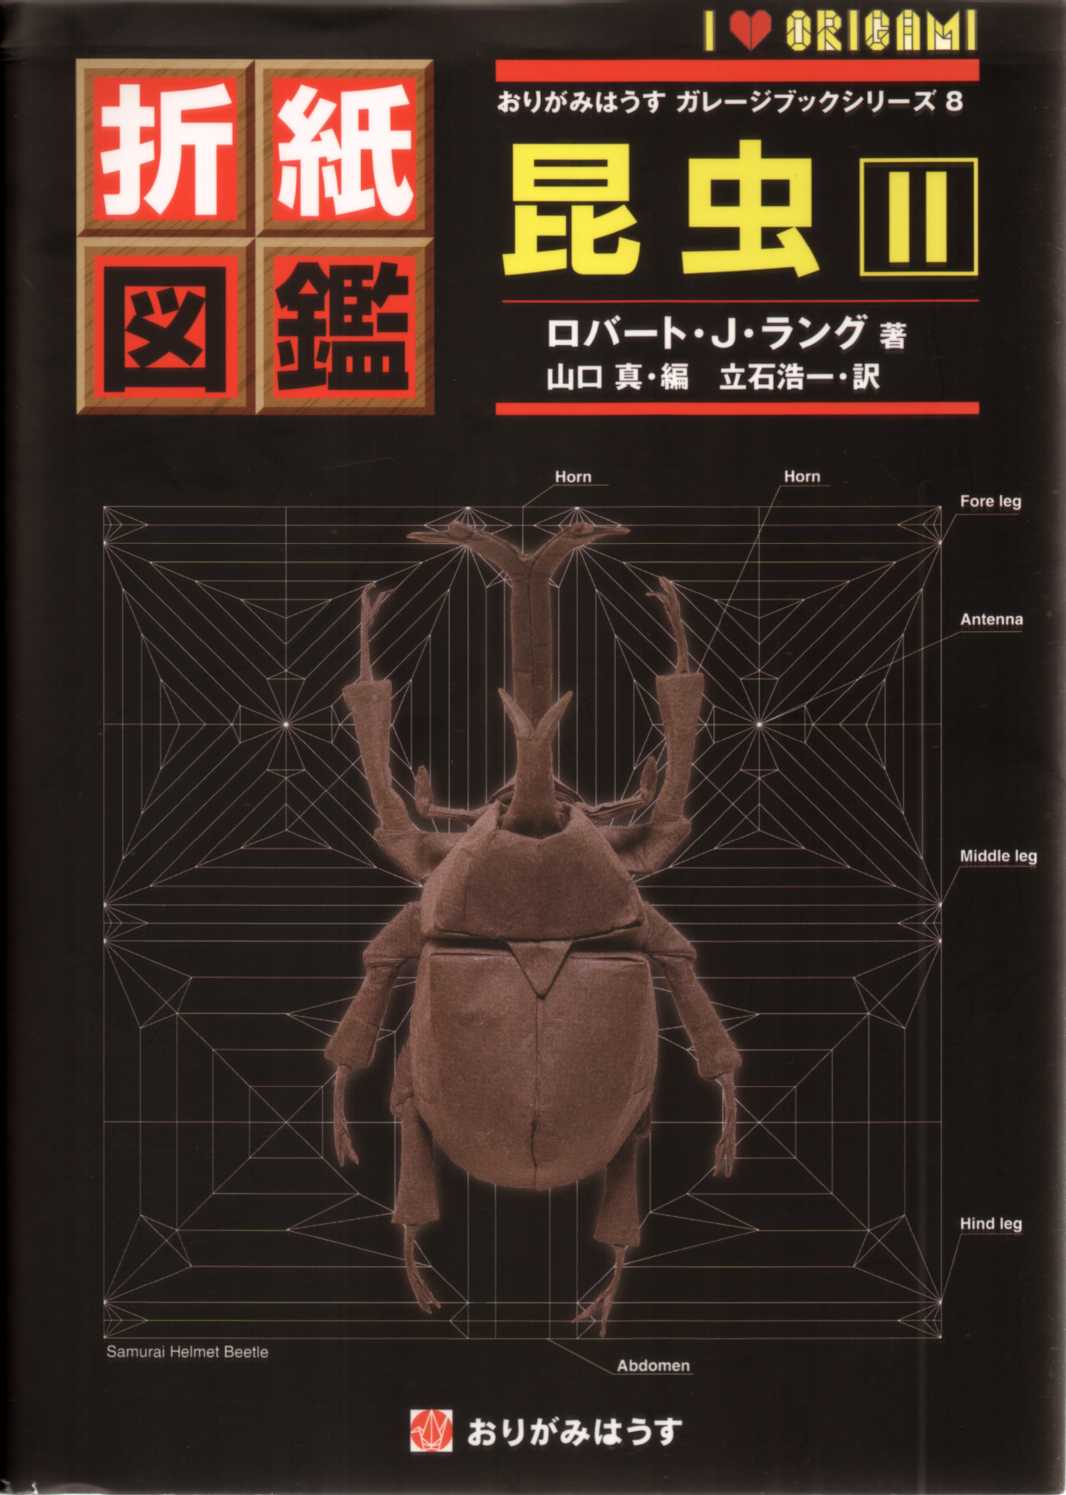 Origami Insects II / 折紙図鑑　昆虫・2 : page 180.